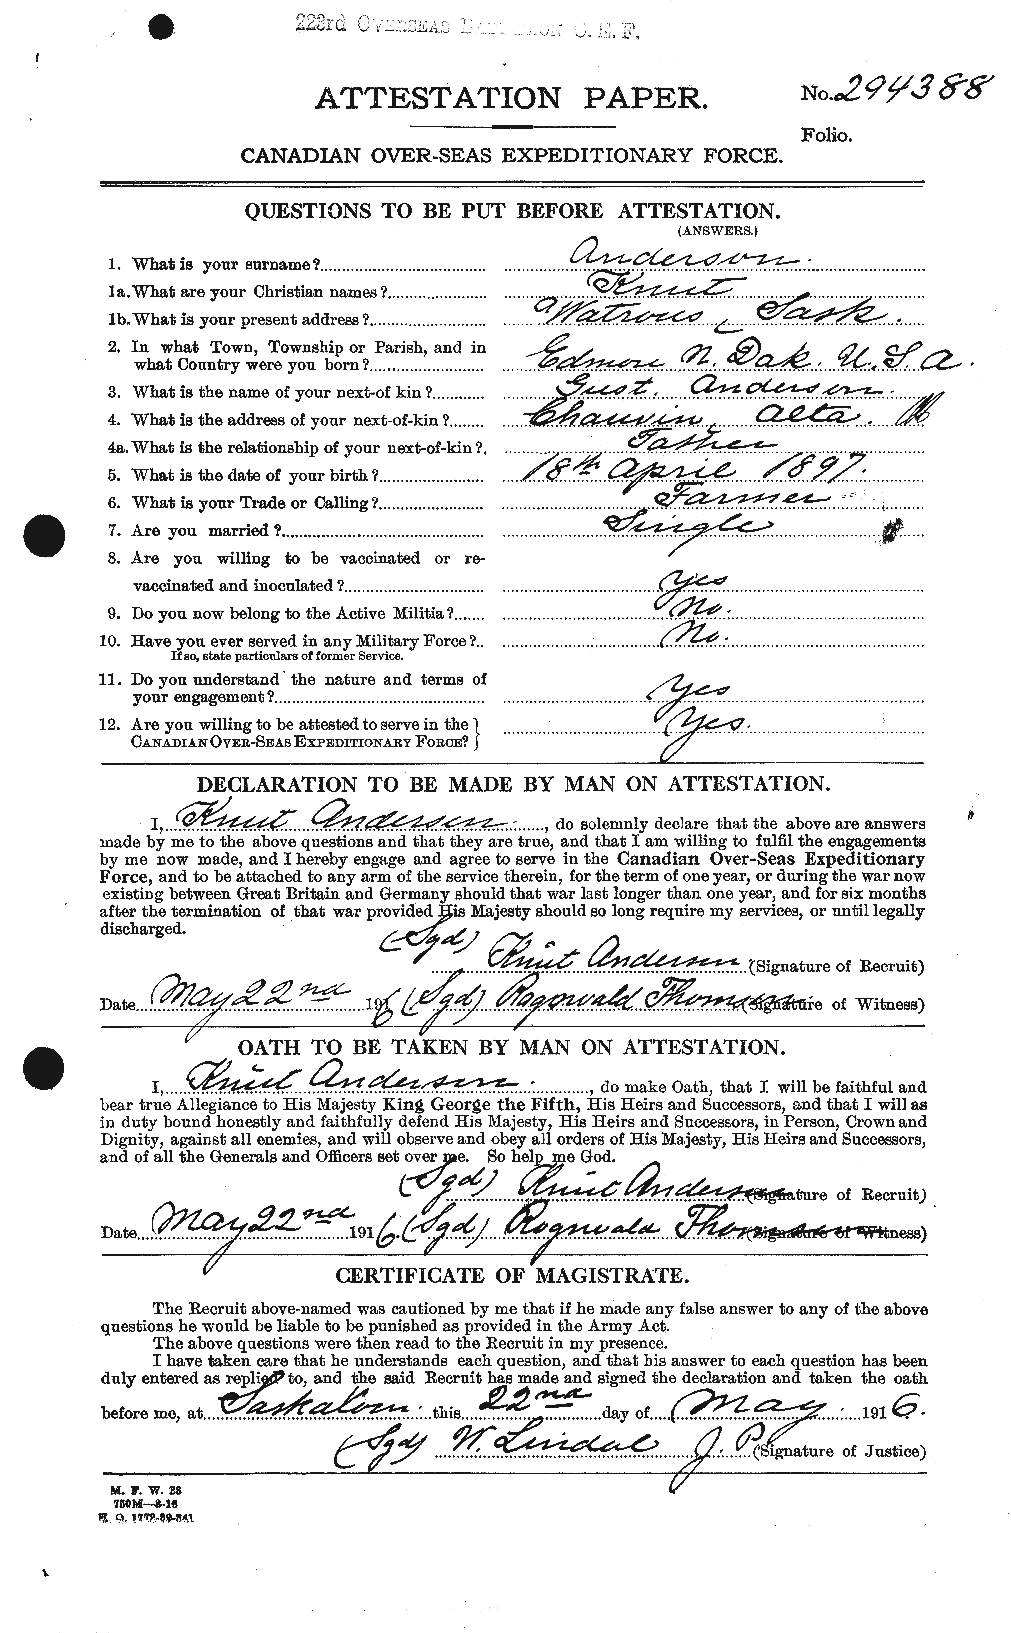 Personnel Records of the First World War - CEF 207536a